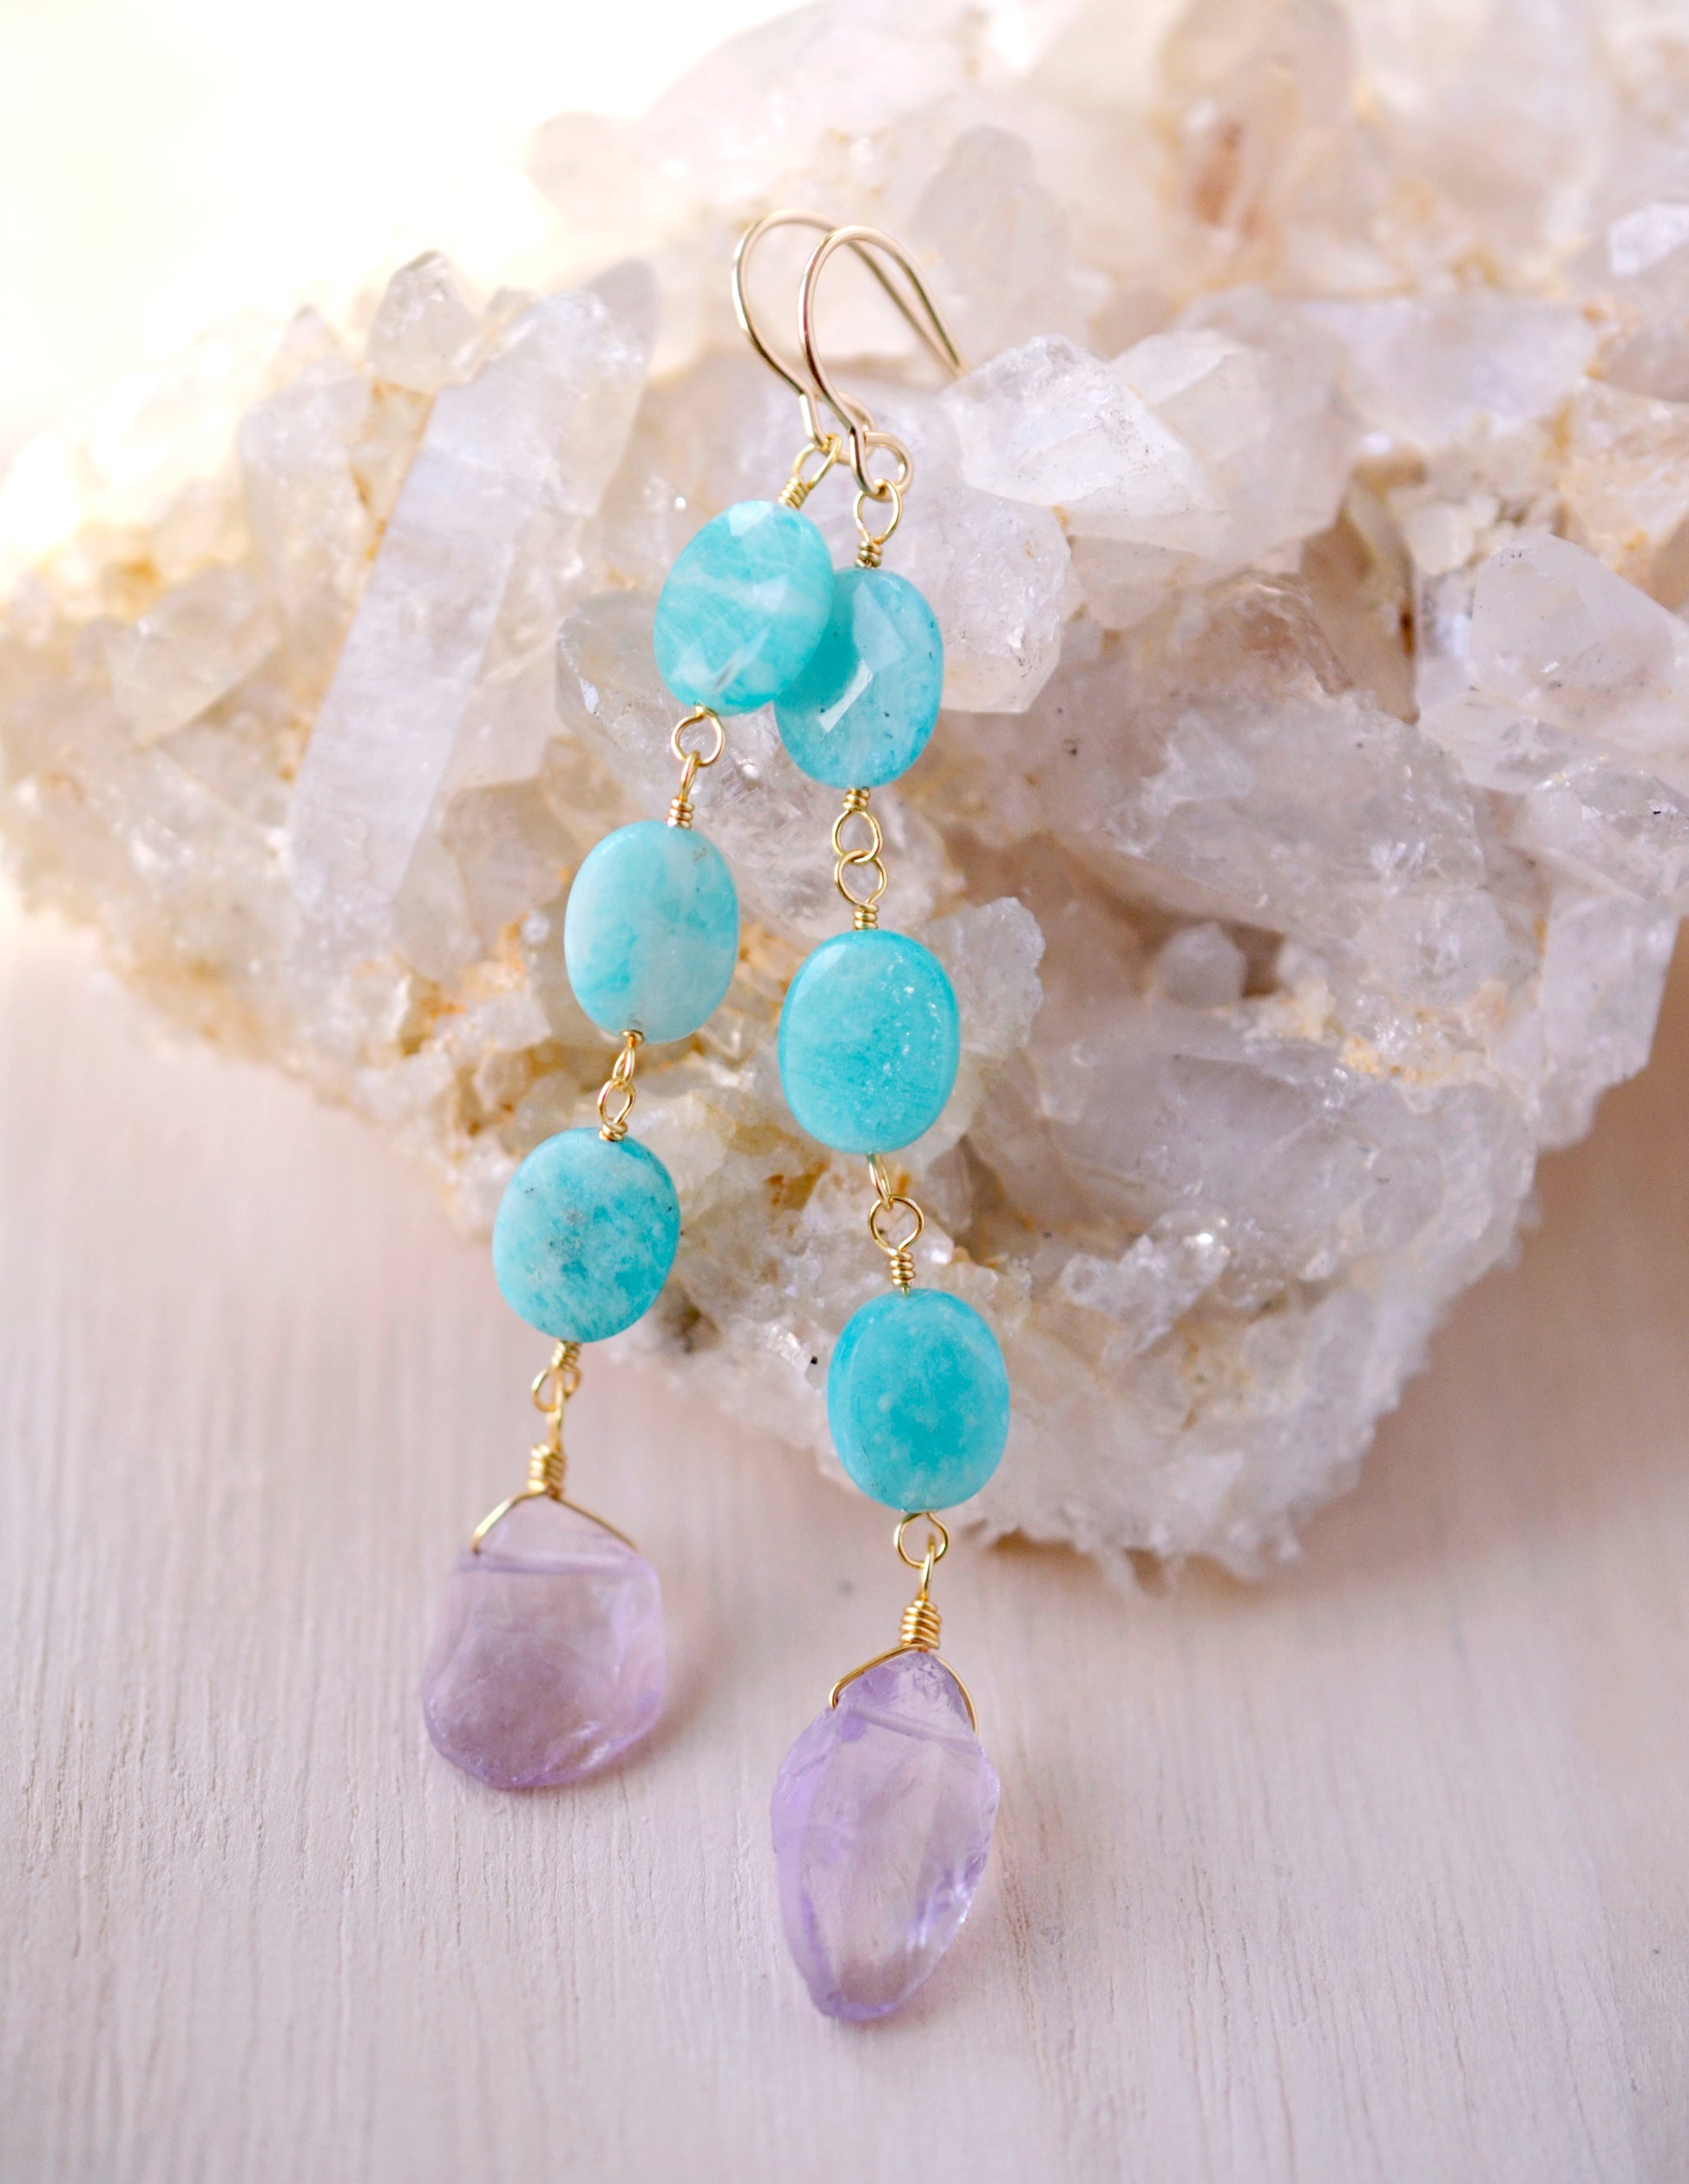 Three Amazonite faceted oval stones hang over raw, pale purple Amethyst crystals. Shown in the 14k gold filled style.